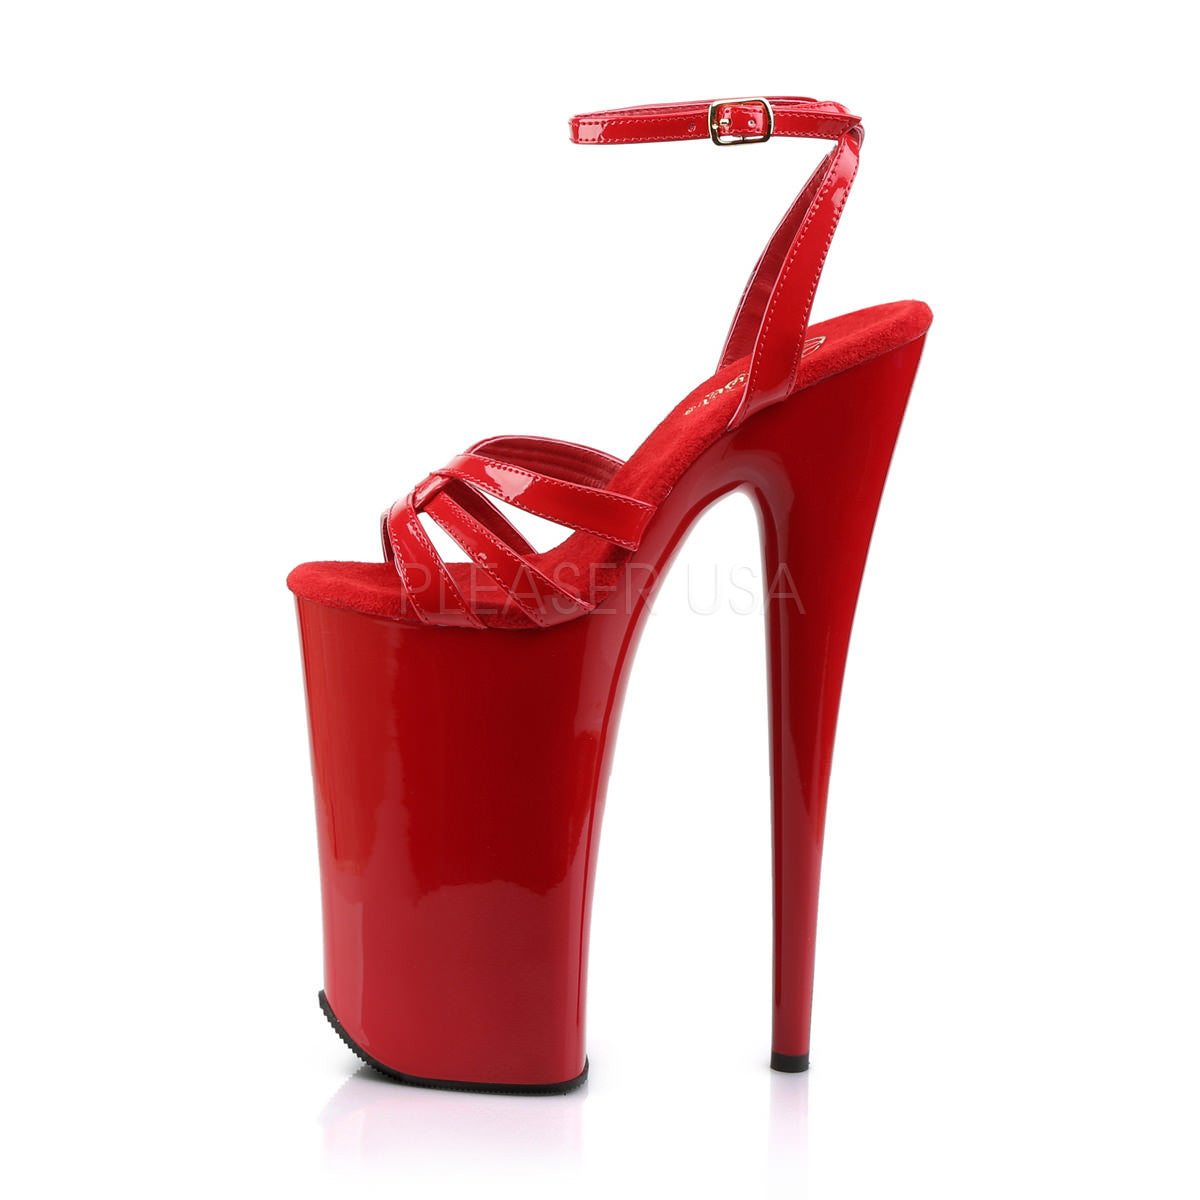 Pleaser BEYOND-012 Red 10 Inch Ankle Strap Sandals - Shoecup.com - 3